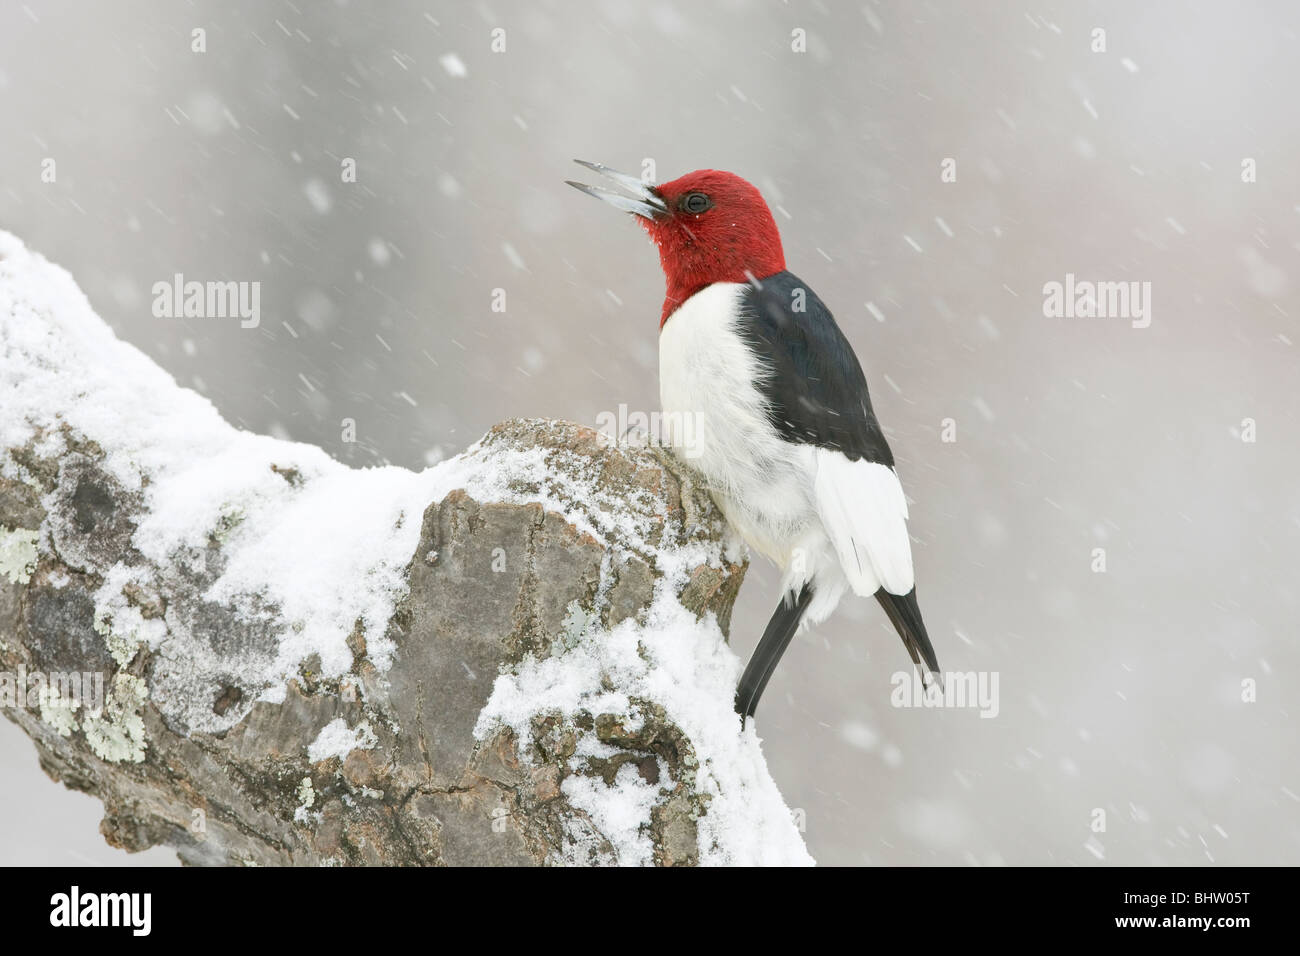 Red-headed Woodpecker perched in snow Stock Photo